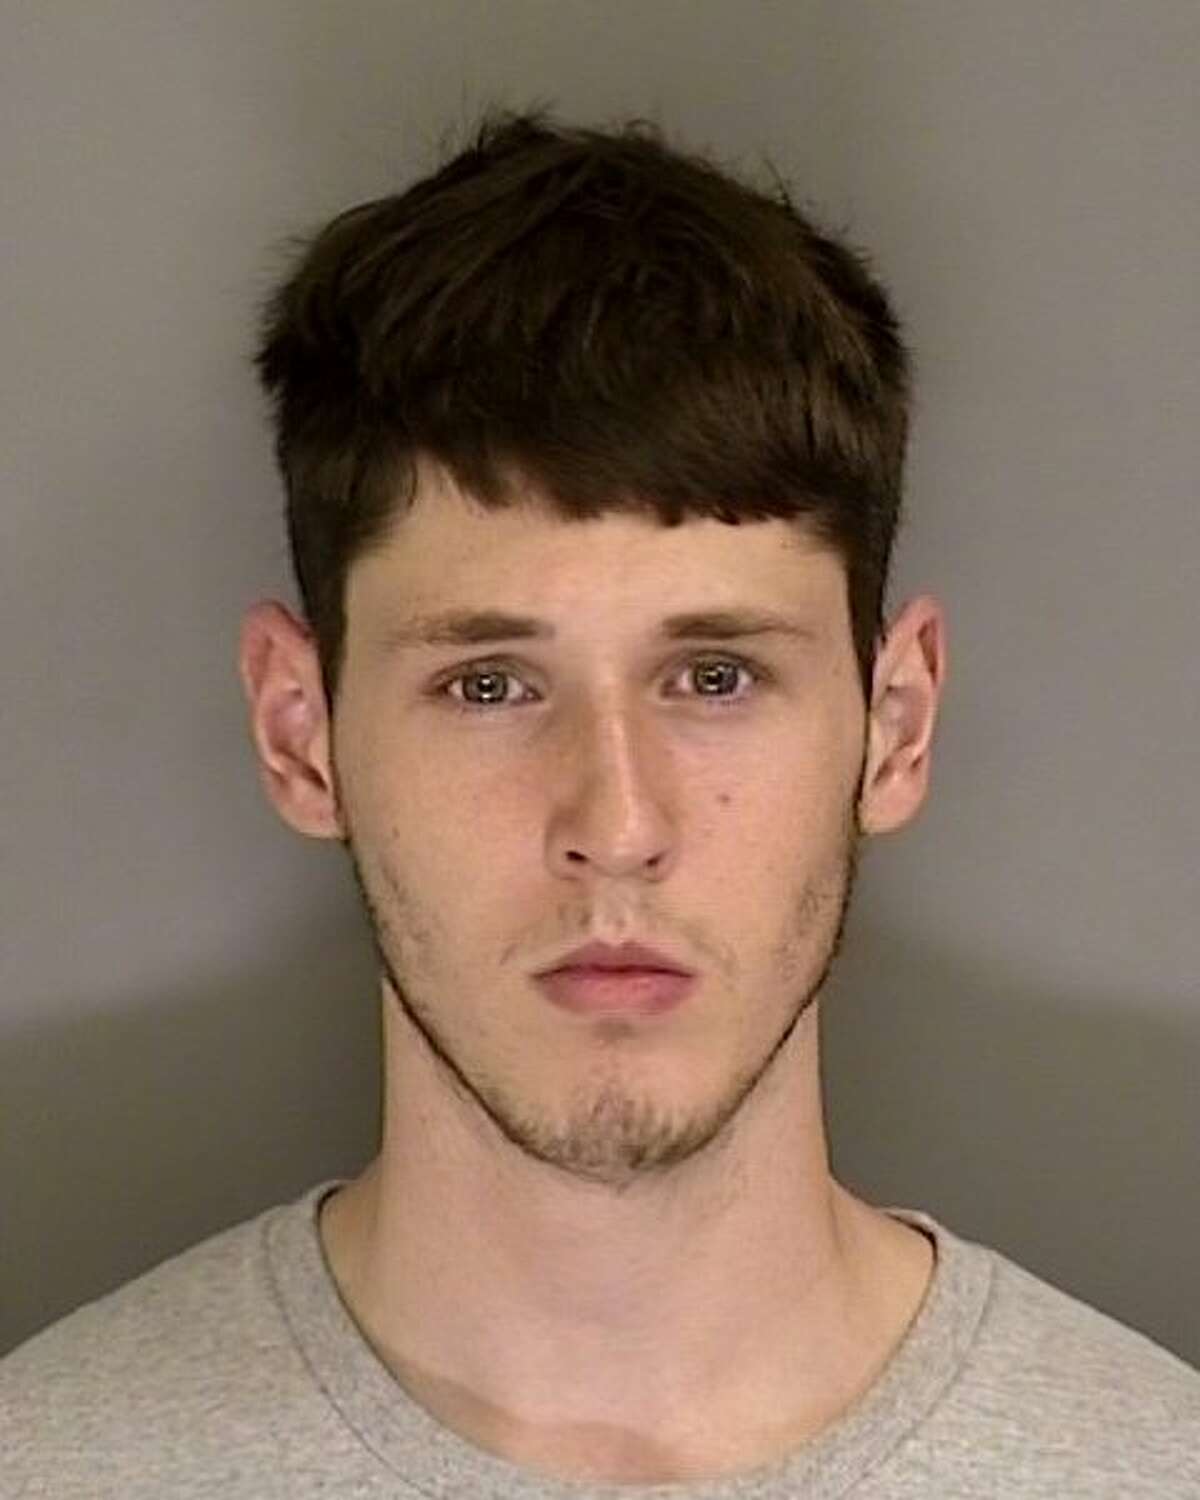 Kurtis Charters, 22, of Los Angeles County, was one of four men arrested May 19 in connection with the kidnapping, robbery and killing of Tushar Atre in October 2019.